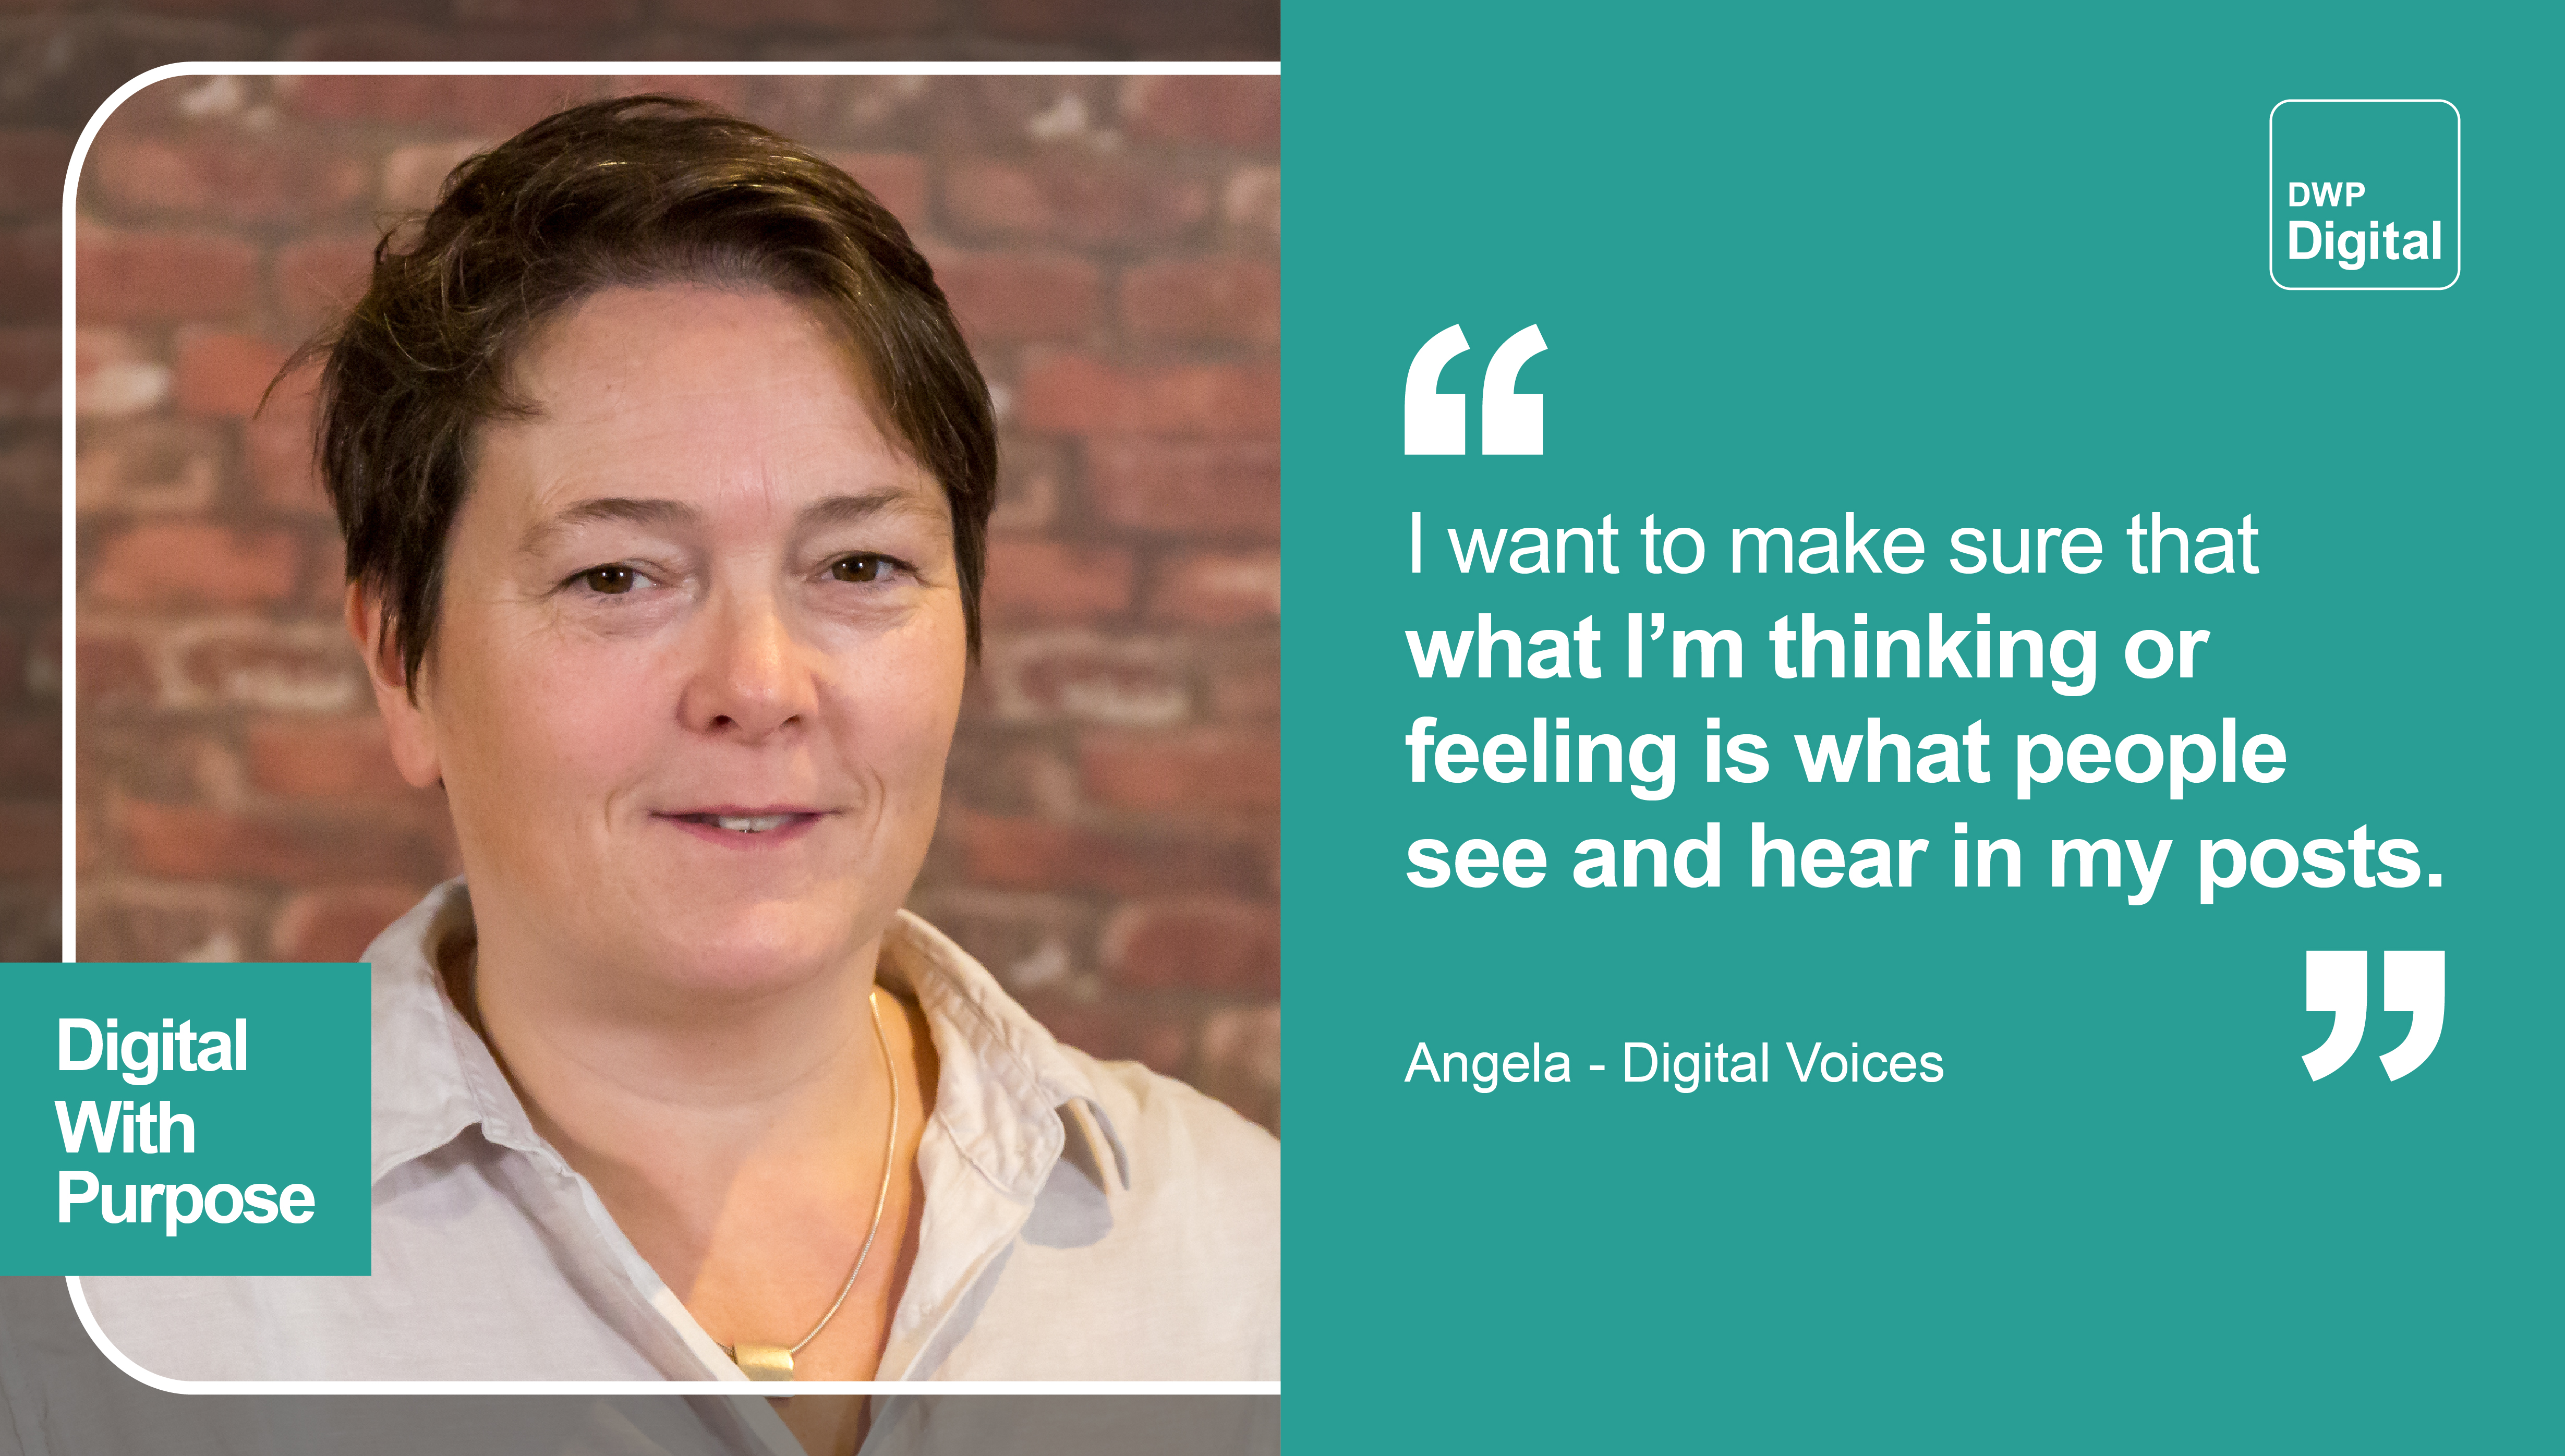 Photo of Angela, from our Digital Voices programme, and text with the quote: “I want to make sure that what I'm thinking or feeling is what people see and hear in my posts.”